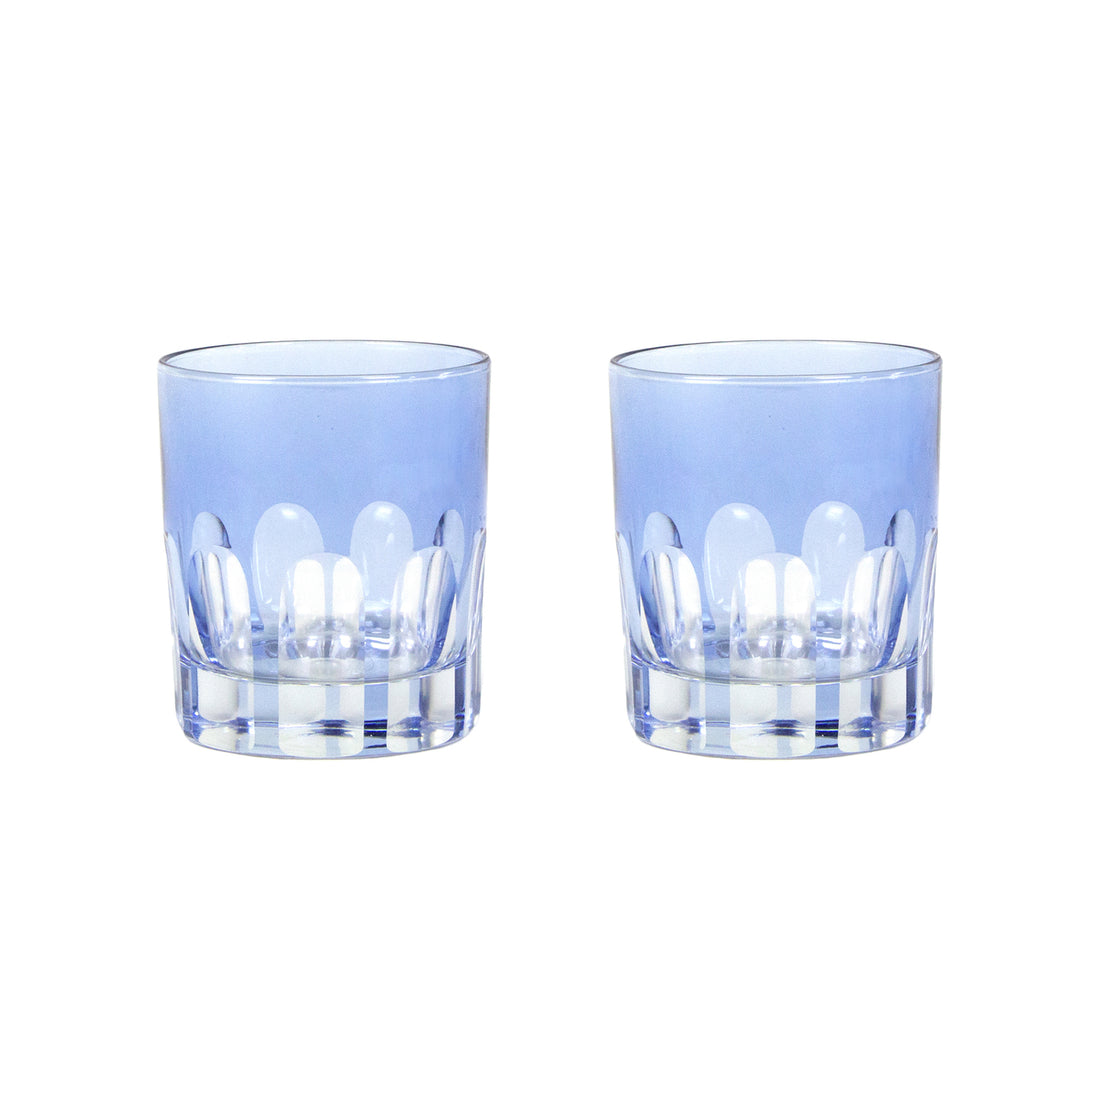 A set of four Rialto Thistle (Light Blue) Glasses by SIR/MADAM on a reflective surface.